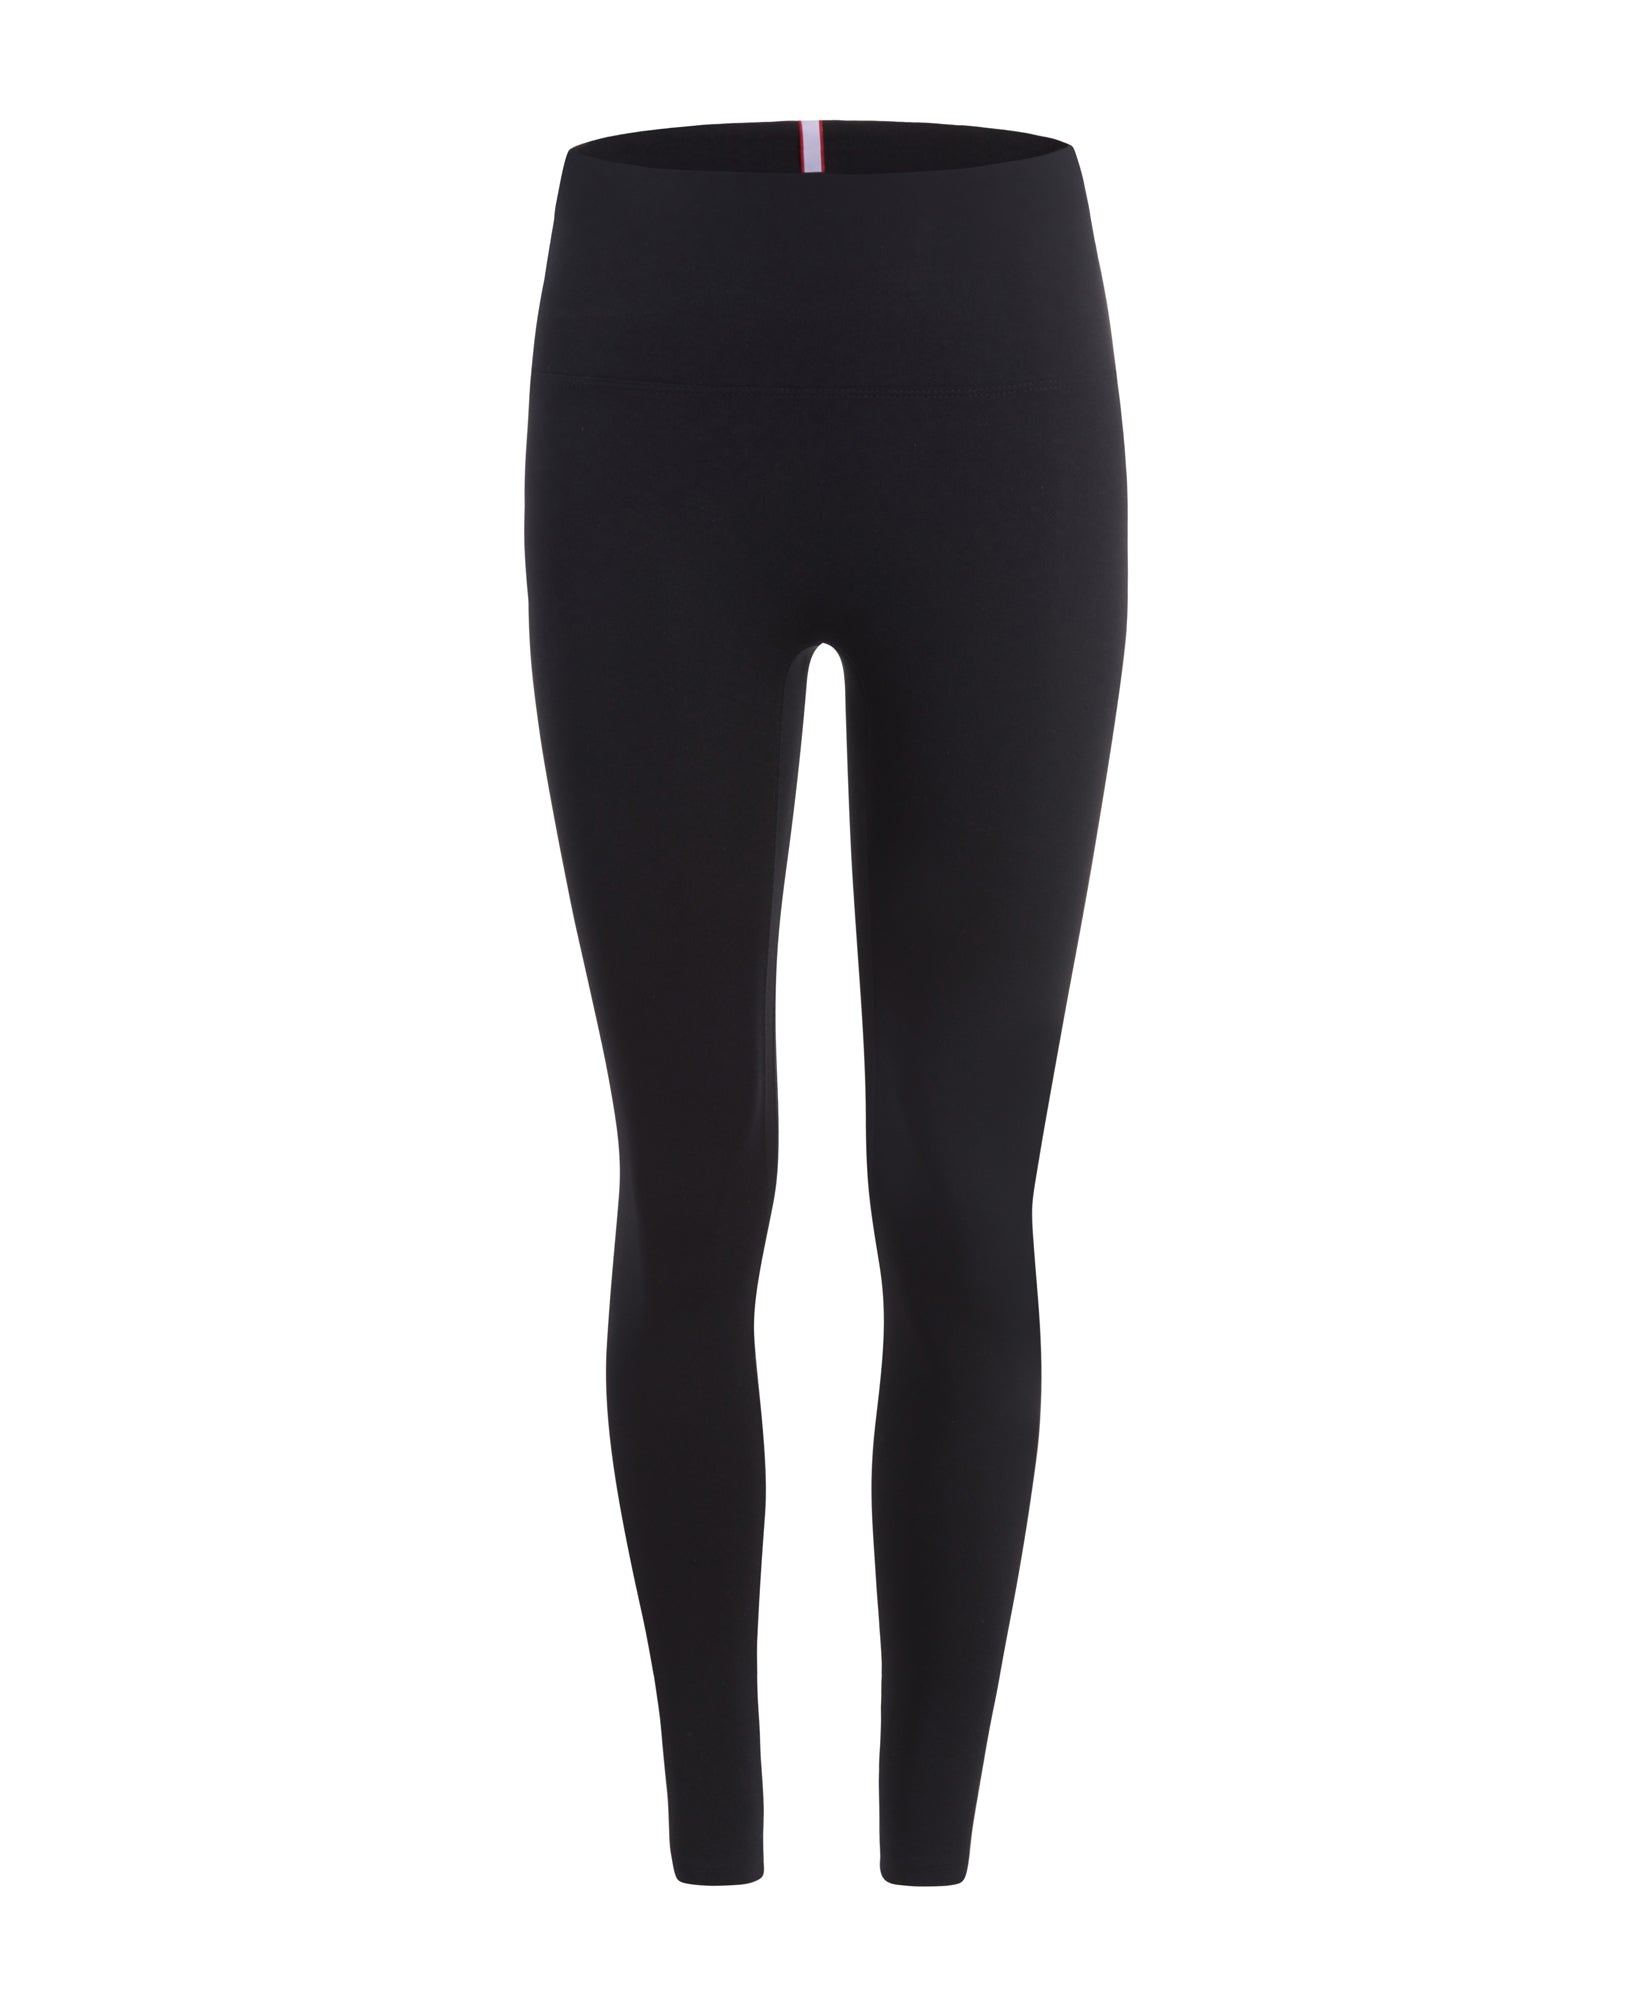 Wear One's At Routine Legging in Bean on Ghost Mannequin Front